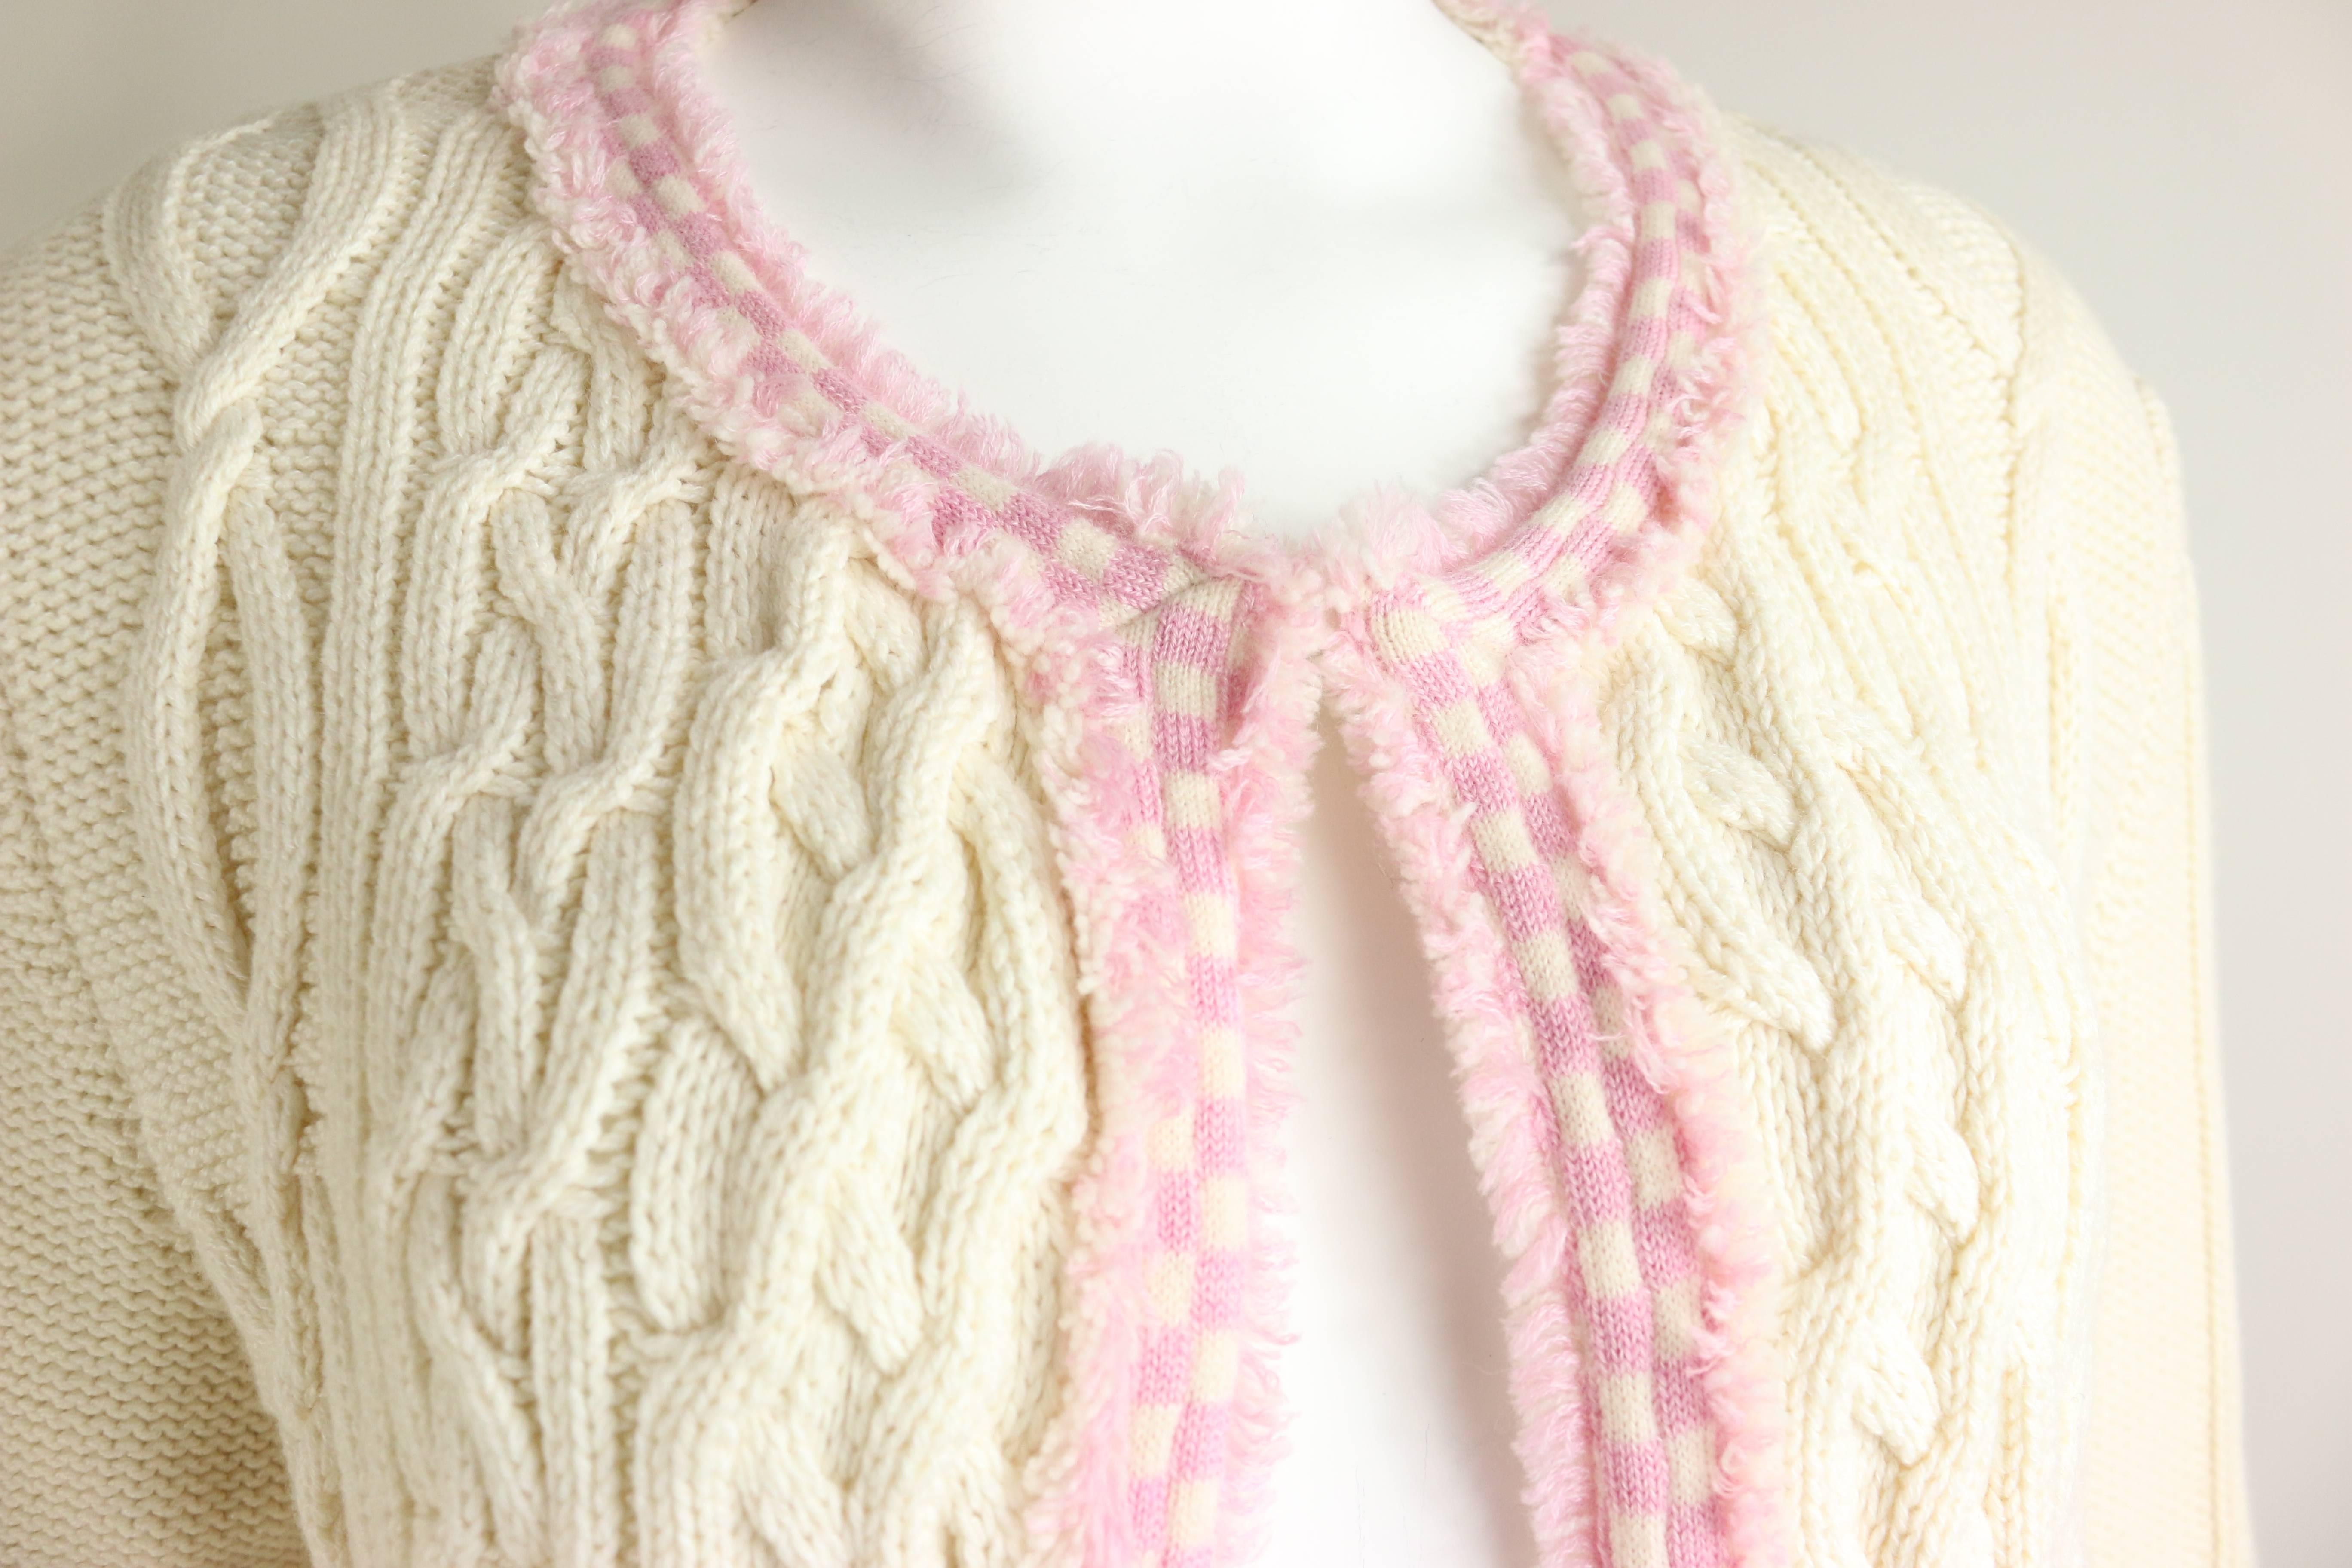 - Chanel white pink fringe trim knitted pattern cardigan sweater from 2005c collection. 

- Featuring no front closure and two front fringe trim pockets. 

- Made in France. 

- Size 42 